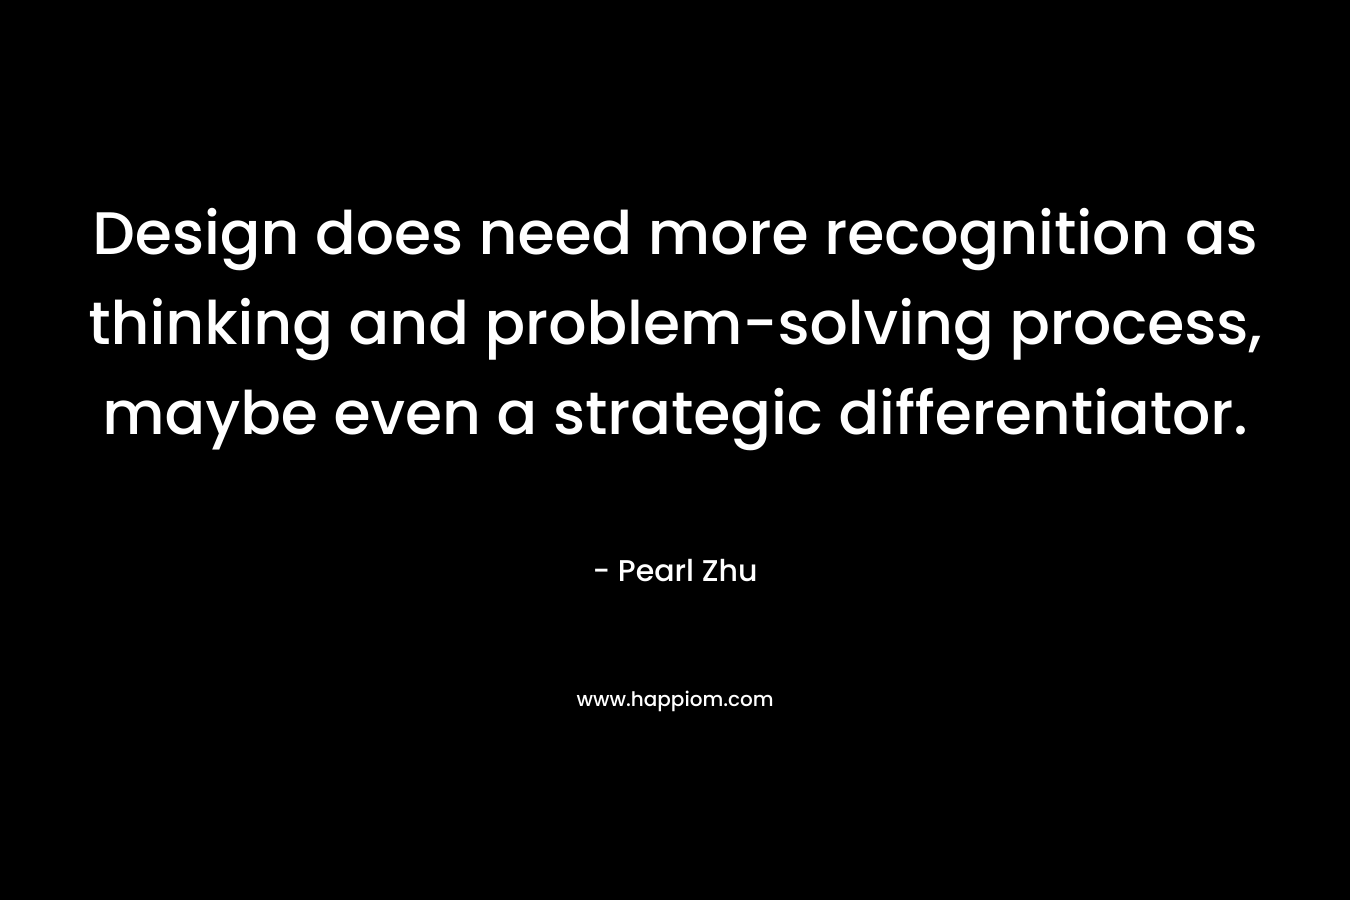 Design does need more recognition as thinking and problem-solving process, maybe even a strategic differentiator.